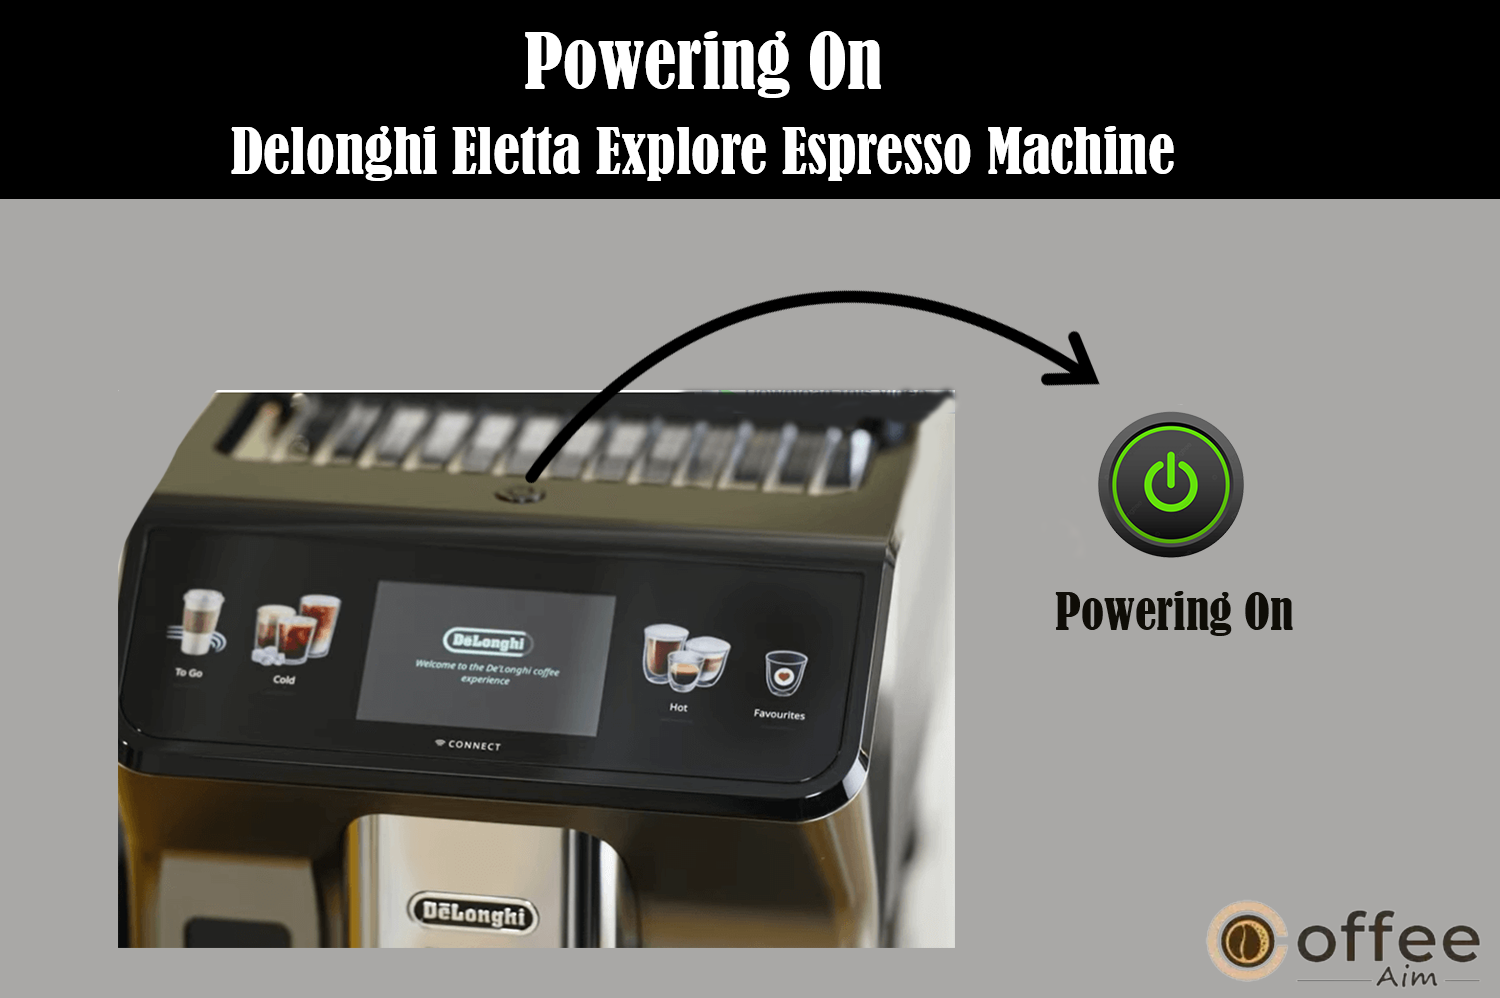 This image demonstrates how to power on the De'Longhi Eletta Explore Espresso Machine, as featured in the article 'How to Use the De'Longhi Eletta Explore Espresso Machine'."